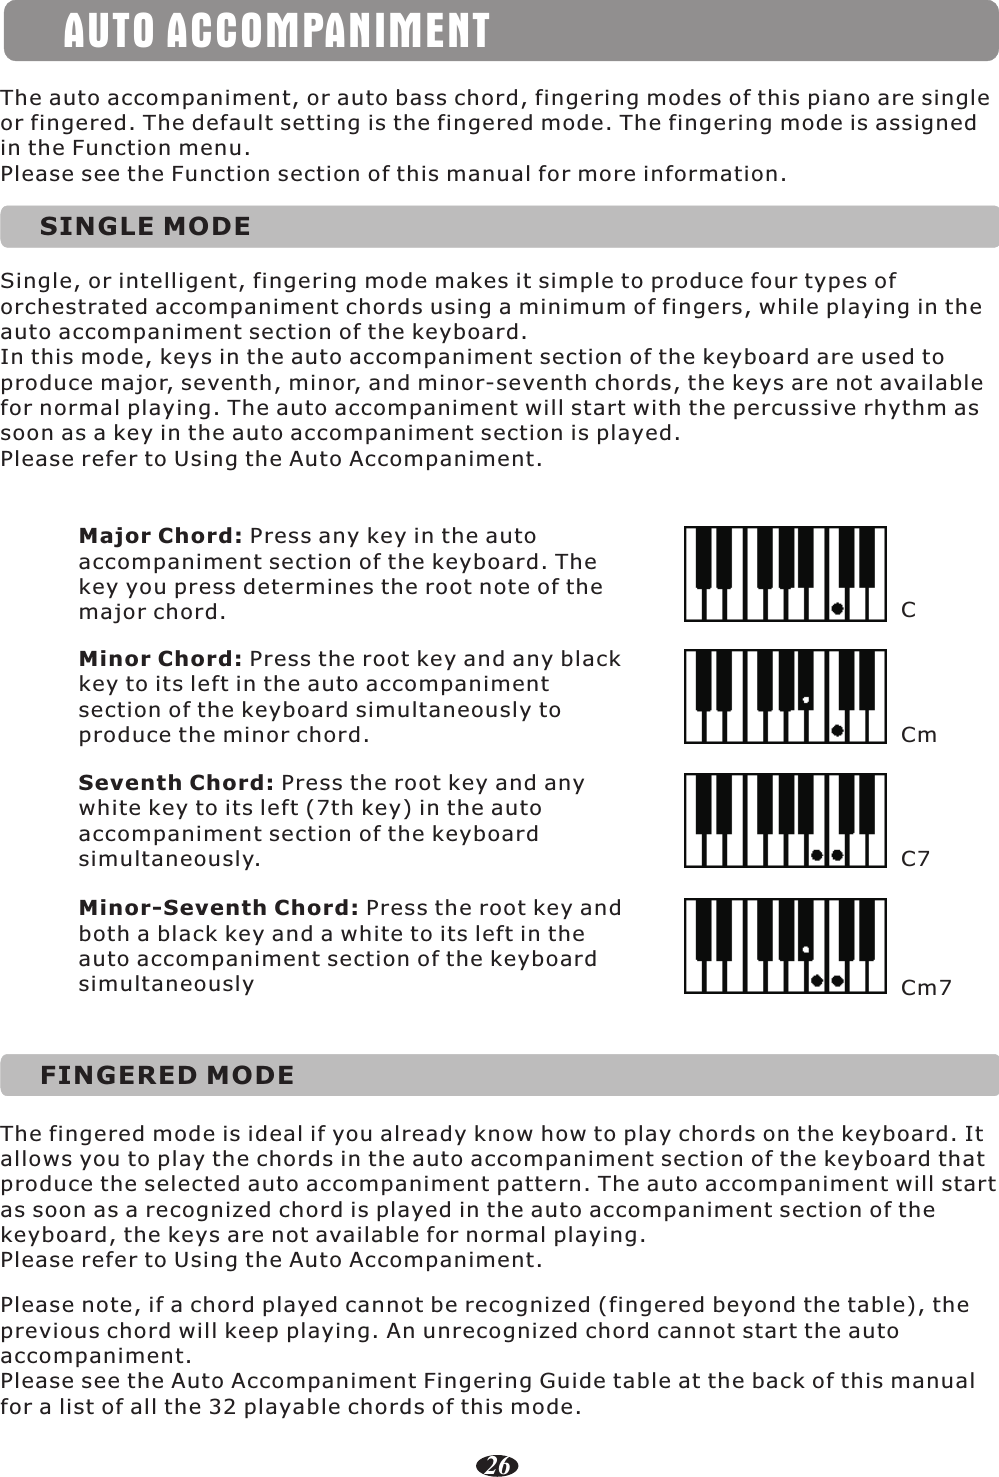 AUTO ACCOMPANIMENTSINGLE MODESingle, or intelligent, fingering mode makes it simple to produce four types of orchestrated accompaniment chords using a minimum of fingers, while playing in the auto accompaniment section of the keyboard.In this mode, keys in the auto accompaniment section of the keyboard are used to produce major, seventh, minor, and minor-seventh chords, the keys are not available for normal playing. The auto accompaniment will start with the percussive rhythm as soon as a key in the auto accompaniment section is played.Please refer to Using the Auto Accompaniment.The auto accompaniment, or auto bass chord, fingering modes of this piano are single or fingered. The default setting is the fingered mode. The fingering mode is assigned in the Function menu.Please see the Function section of this manual for more information.Major Chord: Press any key in the autoaccompaniment section of the keyboard. Thekey you press determines the root note of themajor chord.Minor Chord: Press the root key and any black key to its left in the auto accompanimentsection of the keyboard simultaneously toproduce the minor chord.Seventh Chord: Press the root key and any white key to its left (7th key) in the autoaccompaniment section of the keyboardsimultaneously.Minor-Seventh Chord: Press the root key andboth a black key and a white to its left in theauto accompaniment section of the keyboardsimultaneouslyCCmC7Cm7FINGERED MODEThe fingered mode is ideal if you already know how to play chords on the keyboard. It allows you to play the chords in the auto accompaniment section of the keyboard that produce the selected auto accompaniment pattern. The auto accompaniment will start as soon as a recognized chord is played in the auto accompaniment section of the keyboard, the keys are not available for normal playing.Please refer to Using the Auto Accompaniment.Please note, if a chord played cannot be recognized (fingered beyond the table), the previous chord will keep playing. An unrecognized chord cannot start the auto accompaniment.Please see the Auto Accompaniment Fingering Guide table at the back of this manual for a list of all the 32 playable chords of this mode.26